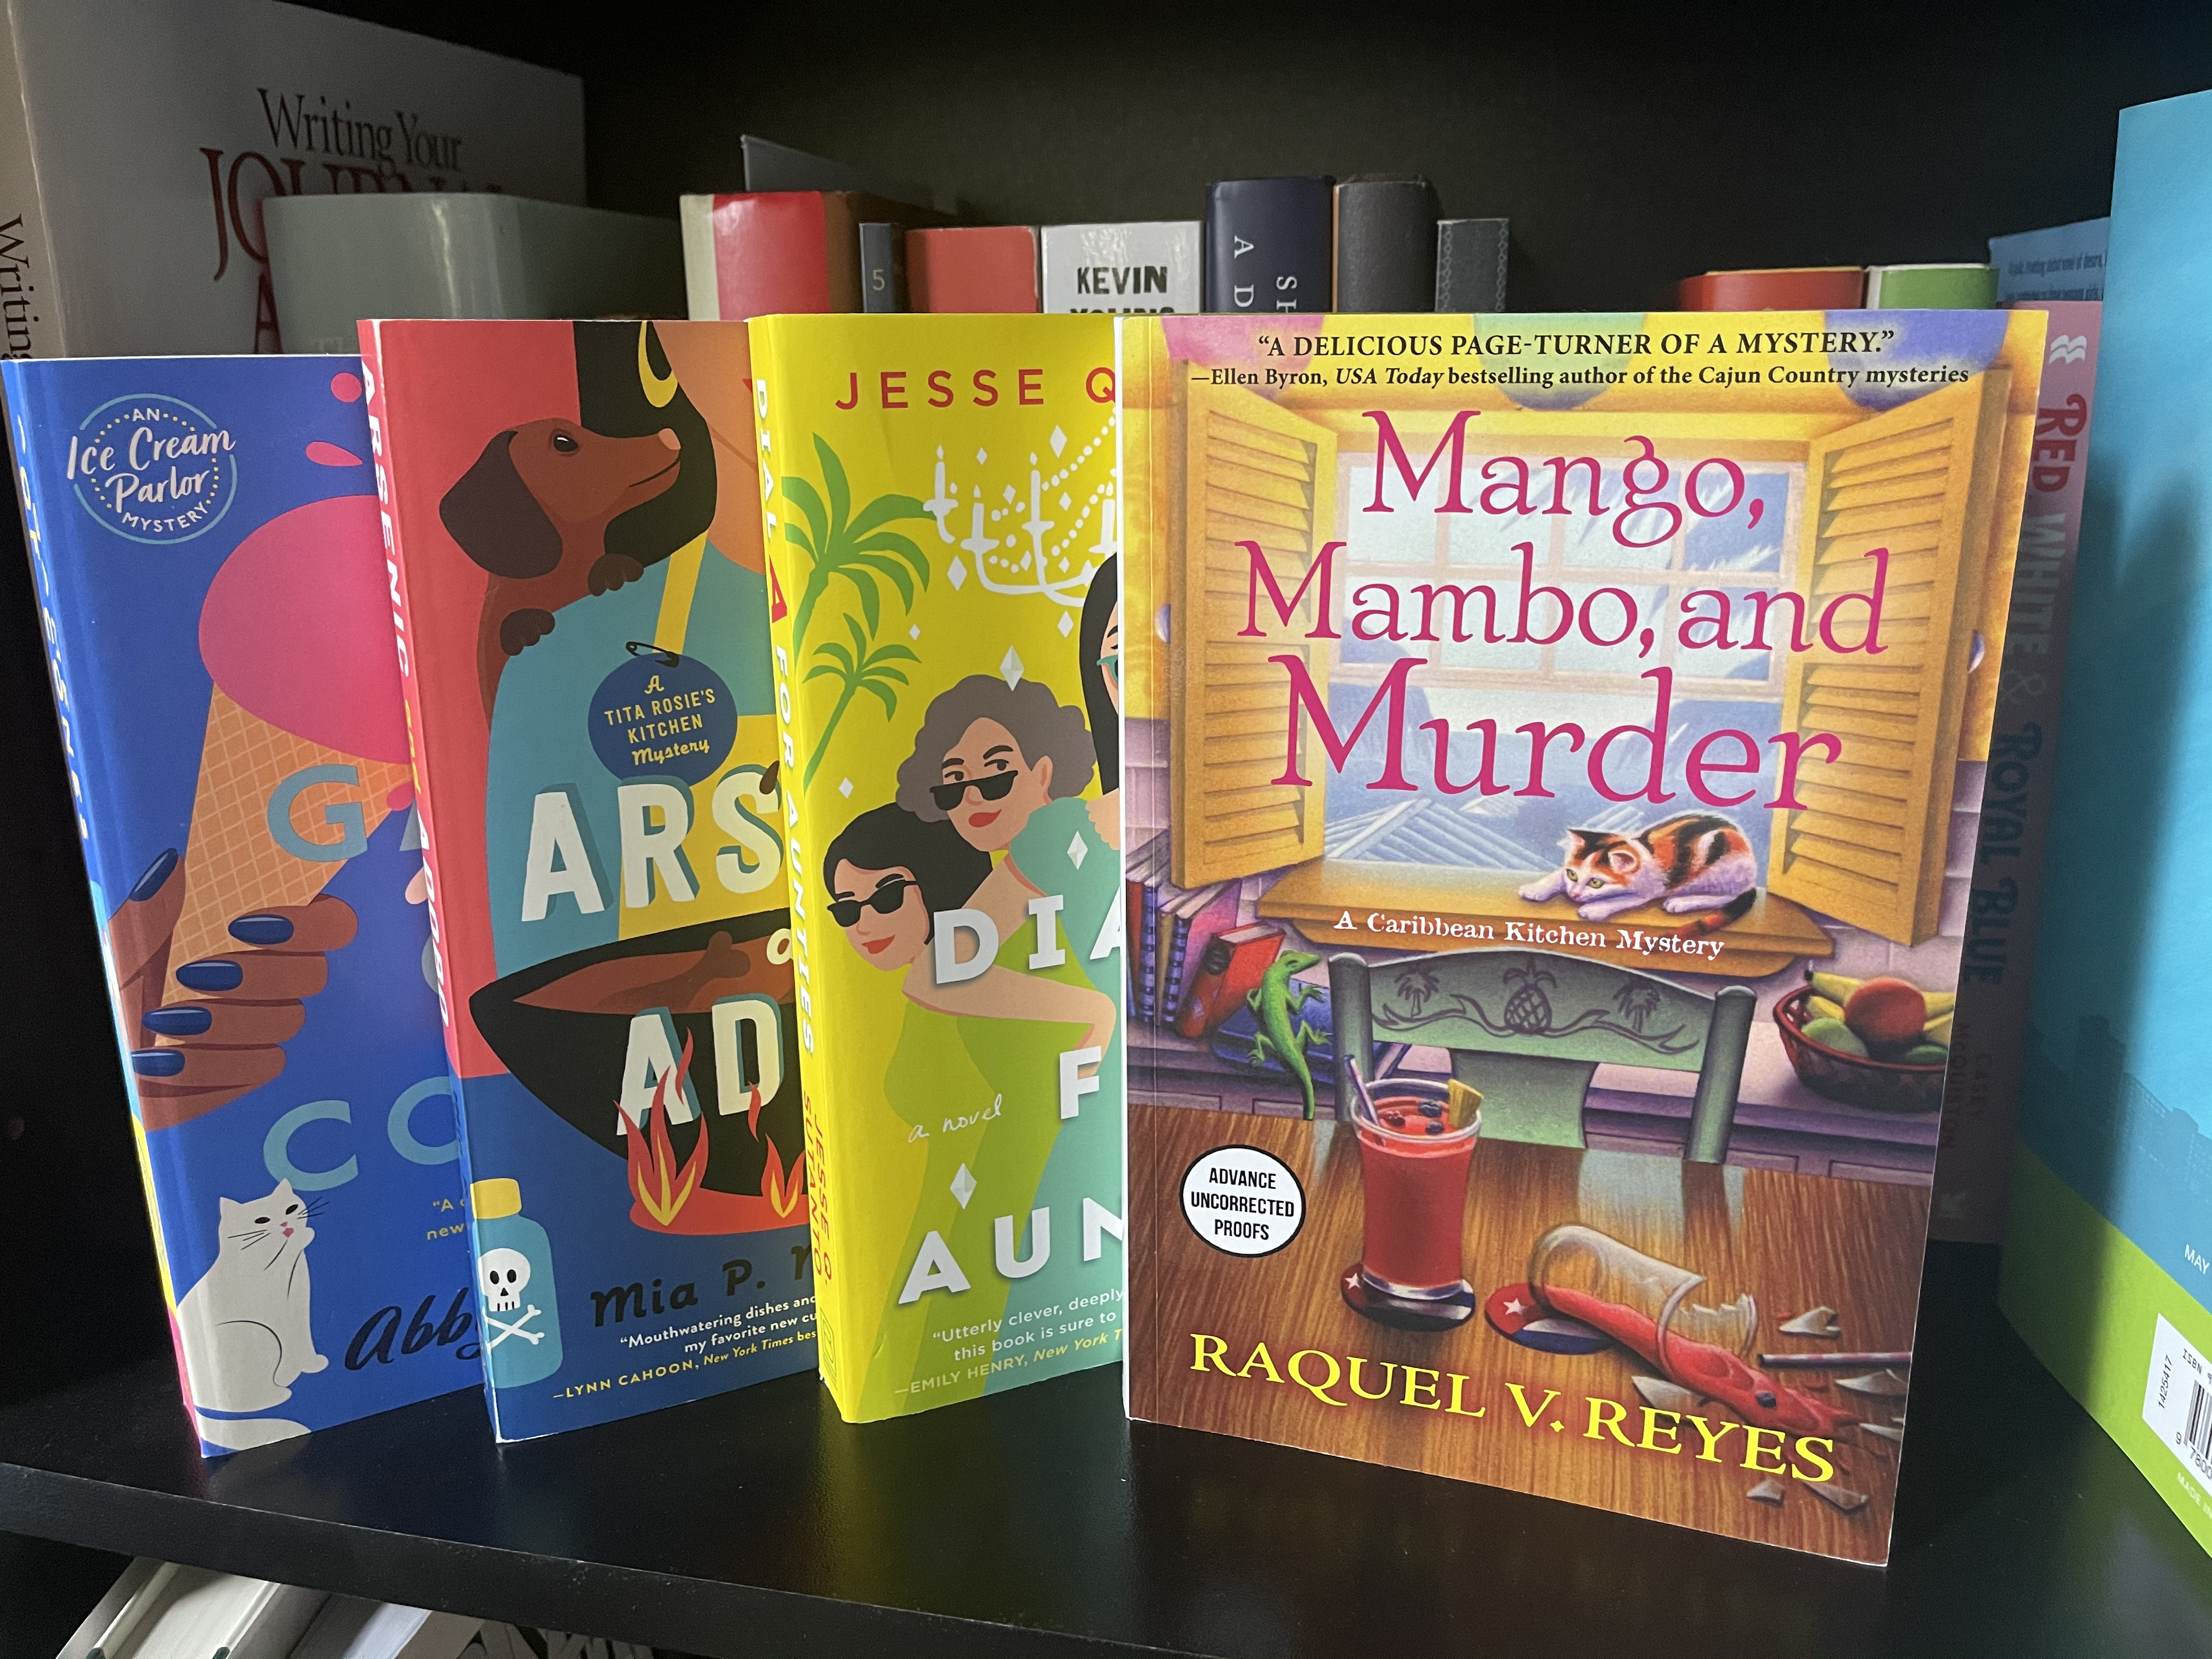 A book shelf shows the covers of four books that reflect the current trend— cozy mysteries are increasingly diverse: Game of Cones, Arsenic and Adobo, Dial A for Aunties, and Mango, Mambo, and Murder (facing forward).